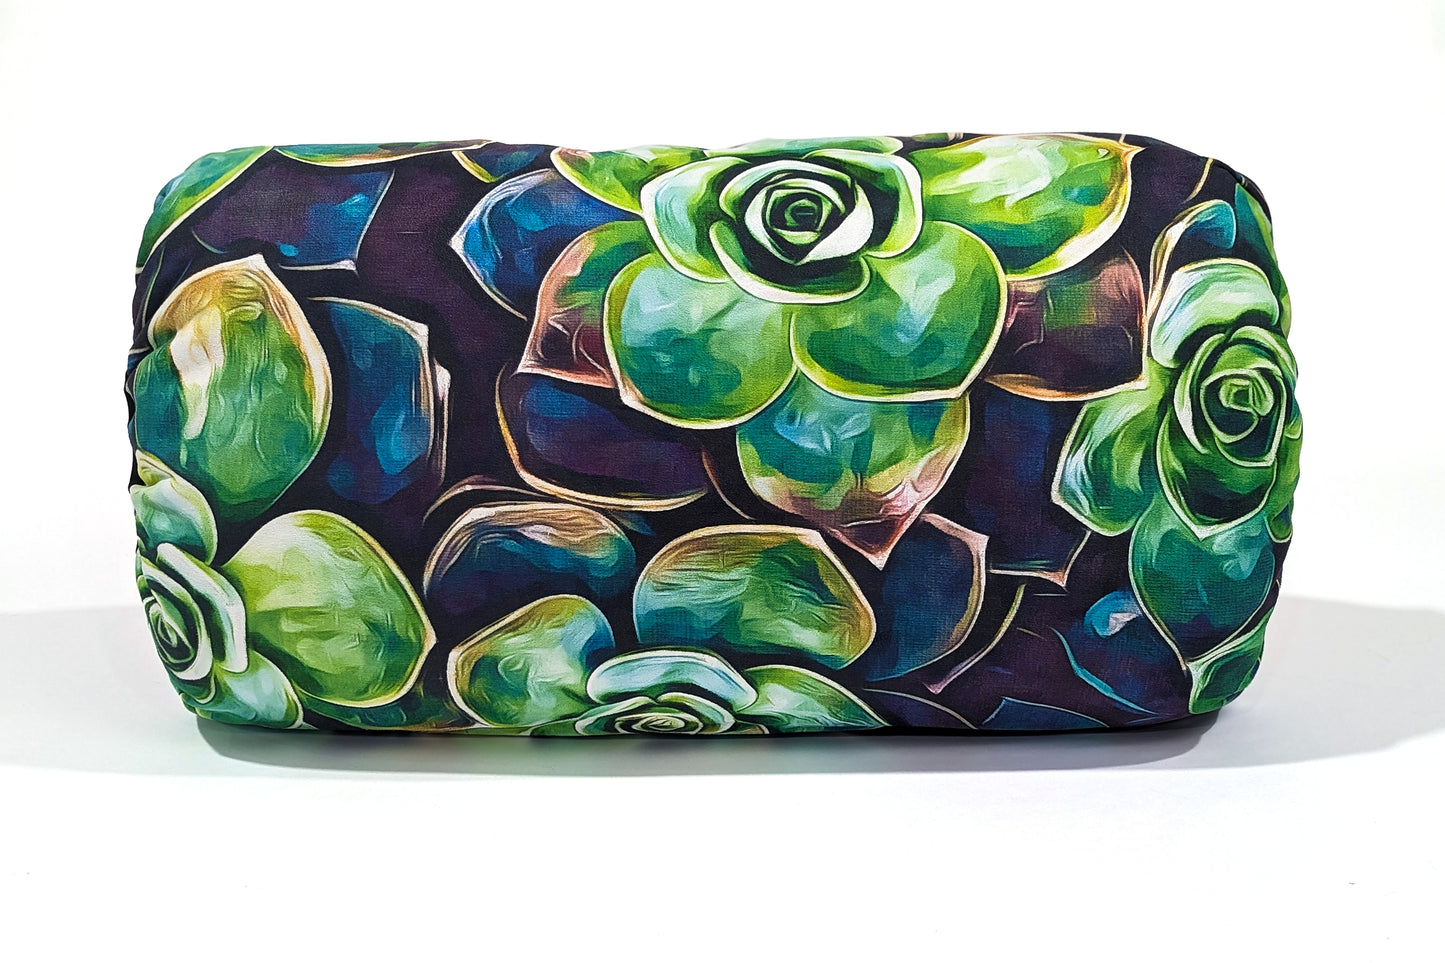 "Group of Succulents" Bolster Cover